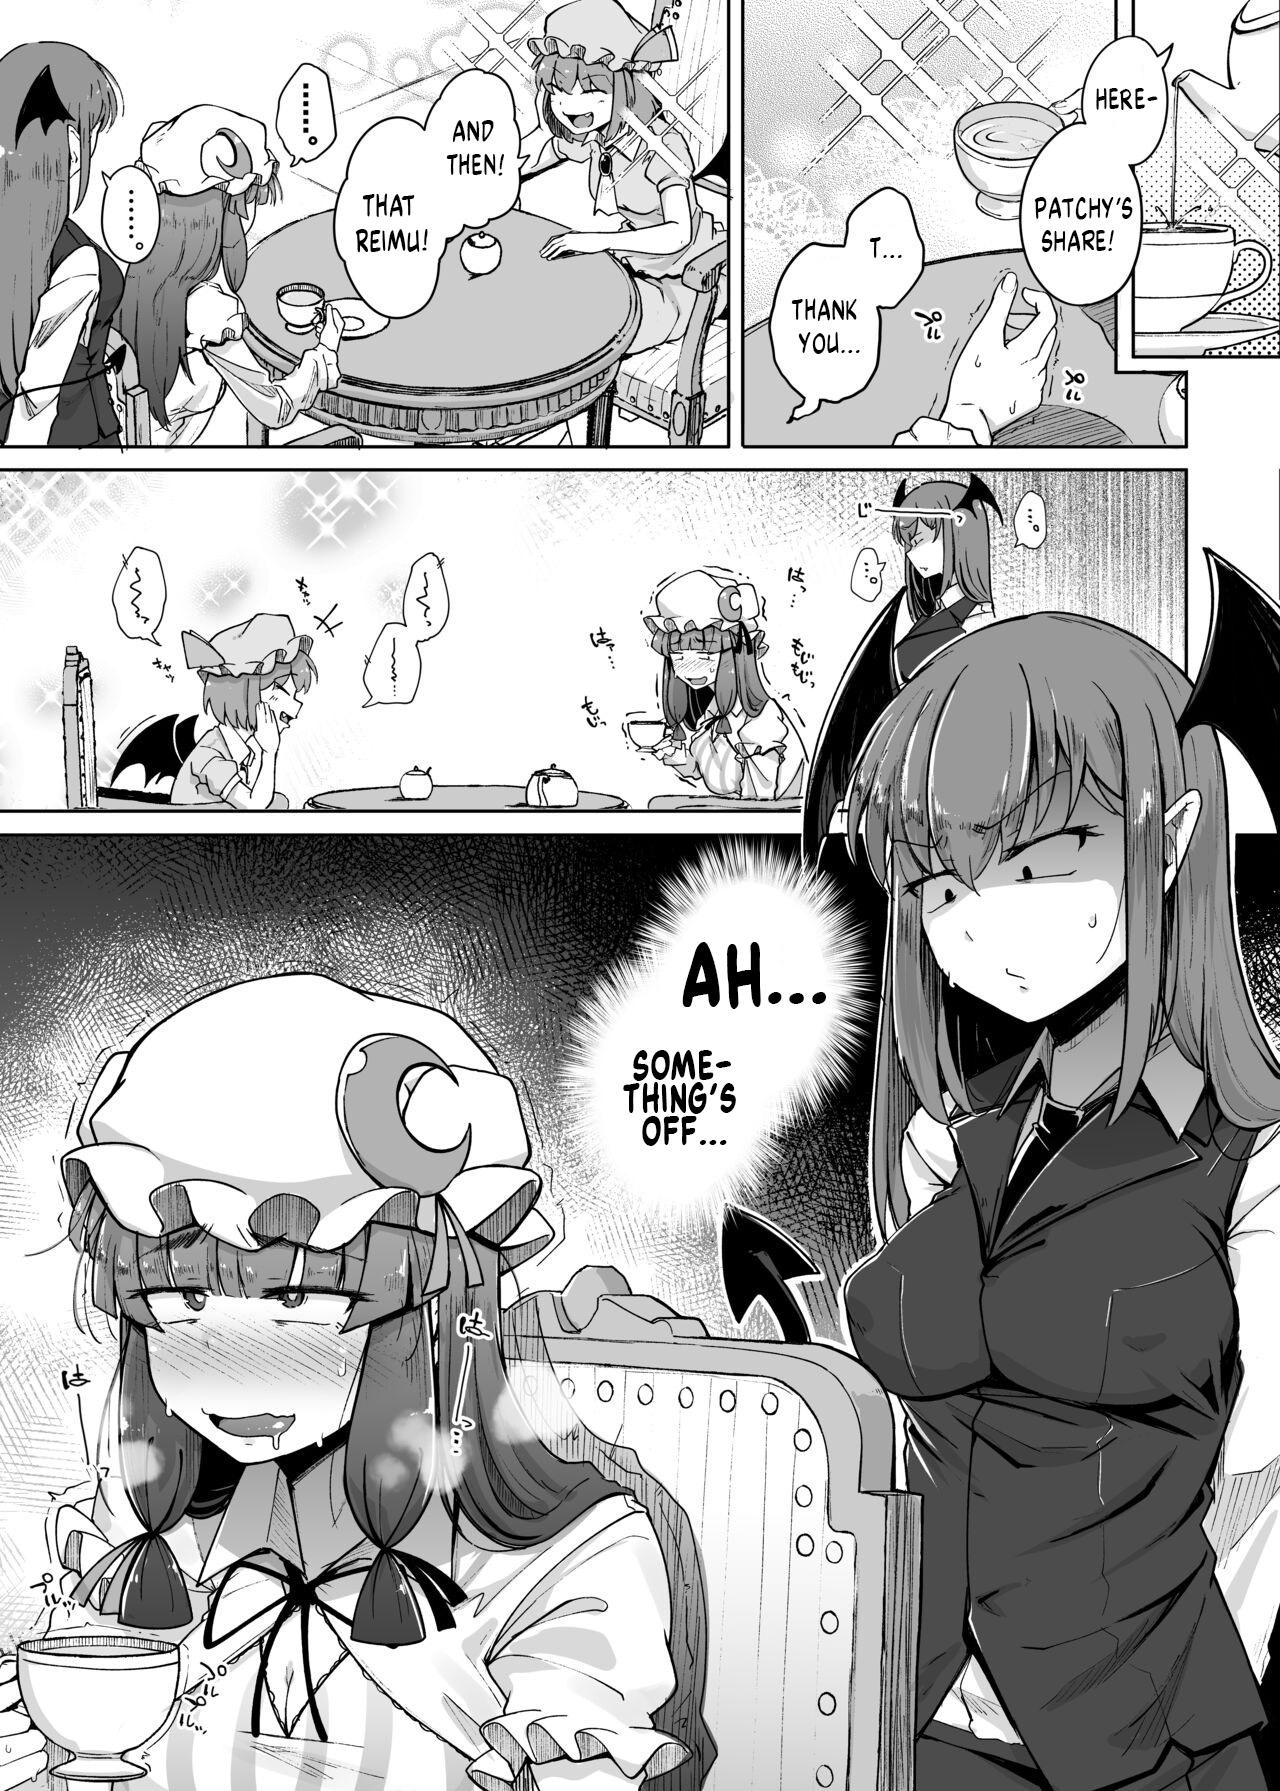 Nylon Ana to Muttsuri Dosukebe Daitoshokan 5 | The Hole and the Closet Perverted Unmoving Great Library 5 - Touhou project Porno Amateur - Page 3